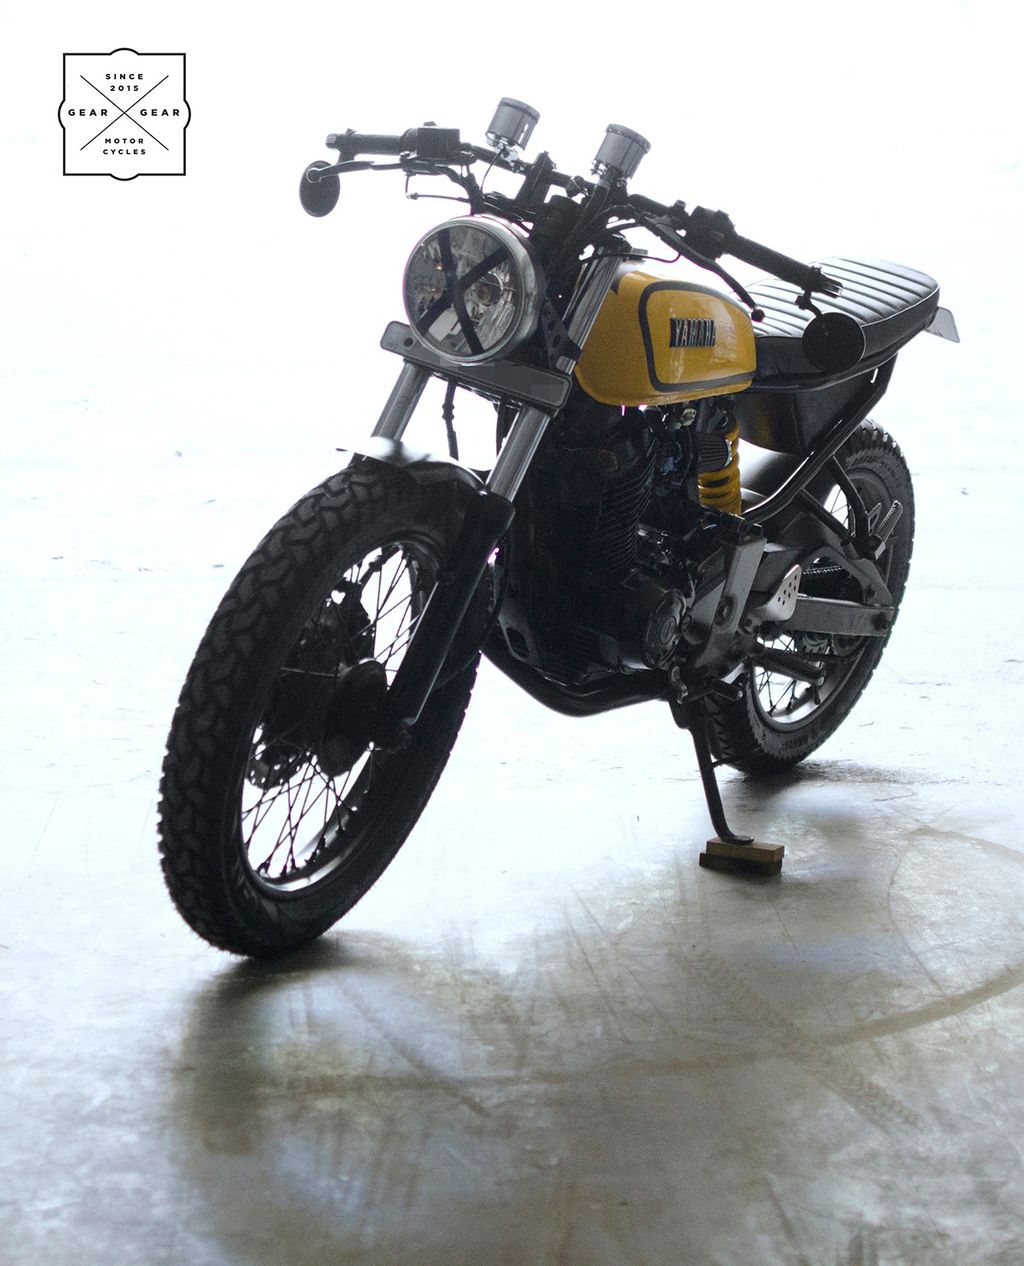 This Yamaha FZ Is Modified Into RX 100 Inspired Cafe Racer